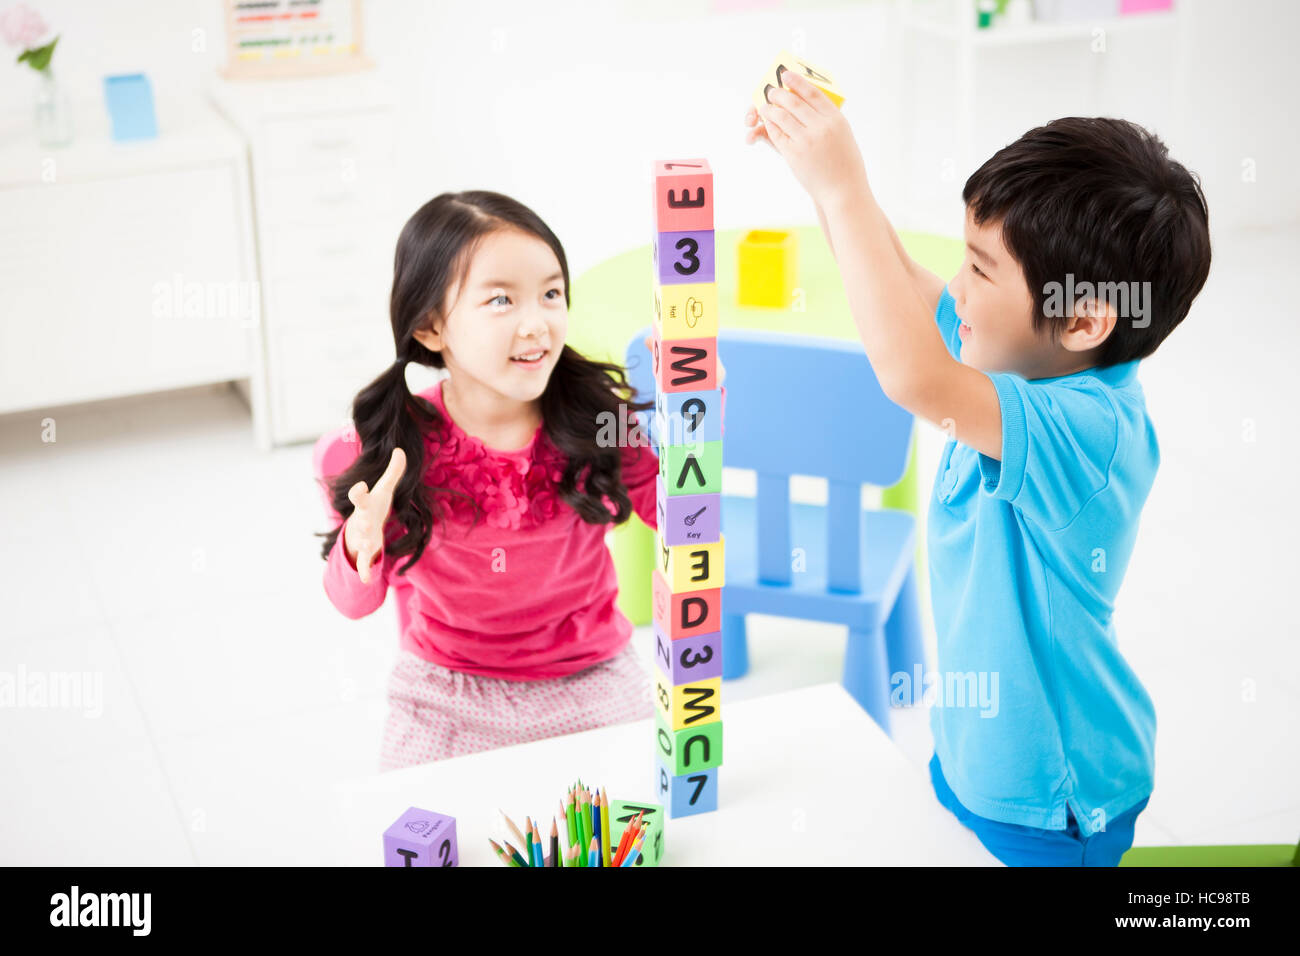 Two smiling children playing with blocks Stock Photo